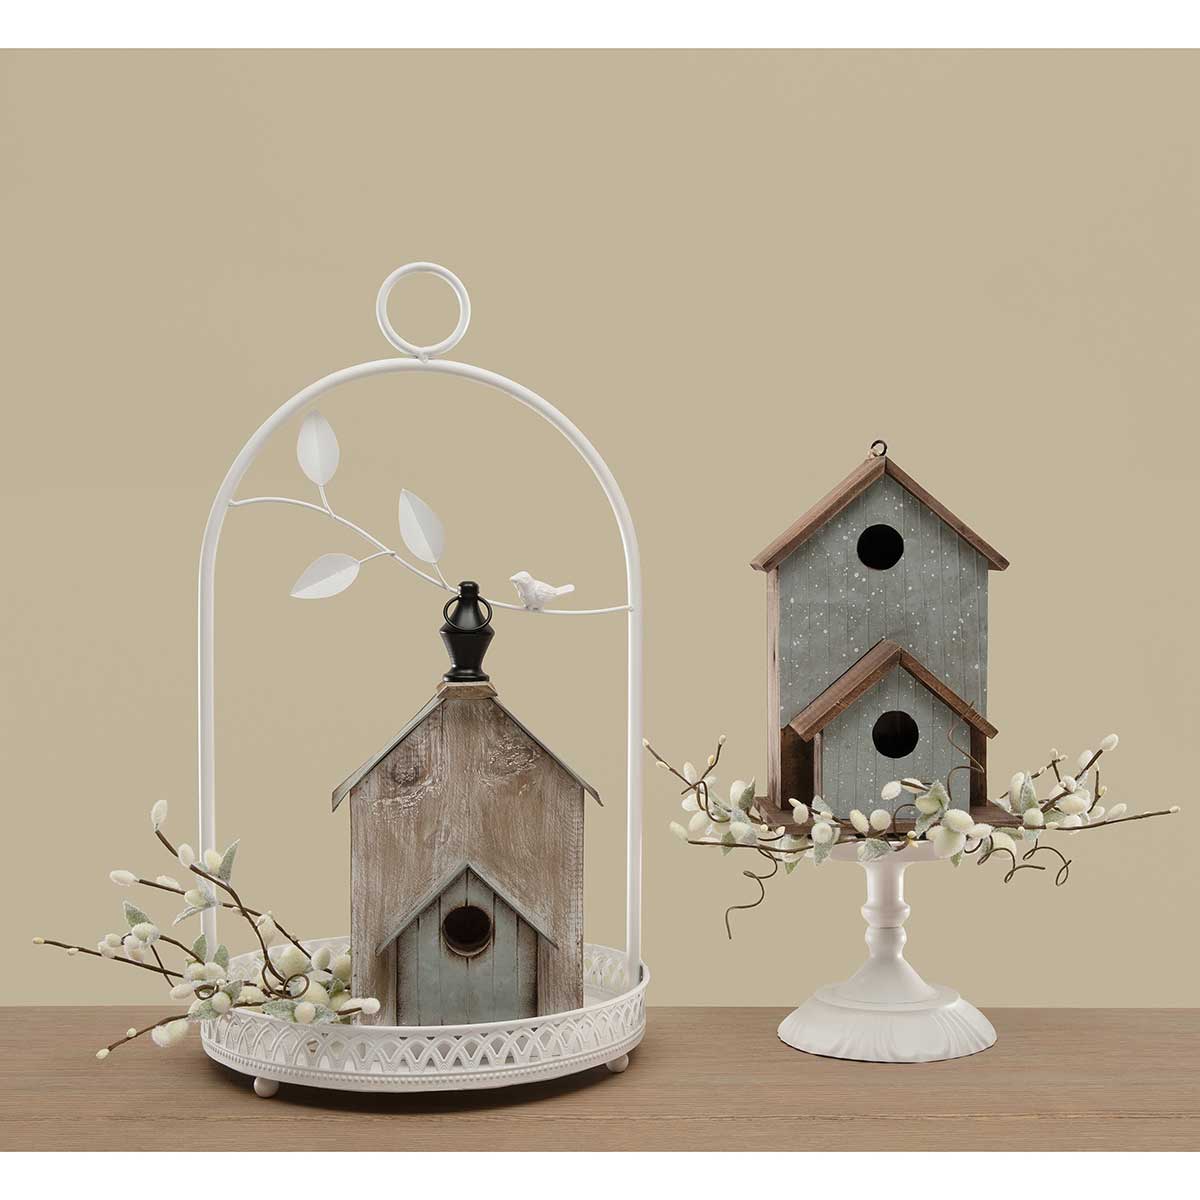 BIRDHOUSE COUNTRY RIBBED 7.25IN X 5IN X 10IN METAL/WOOD